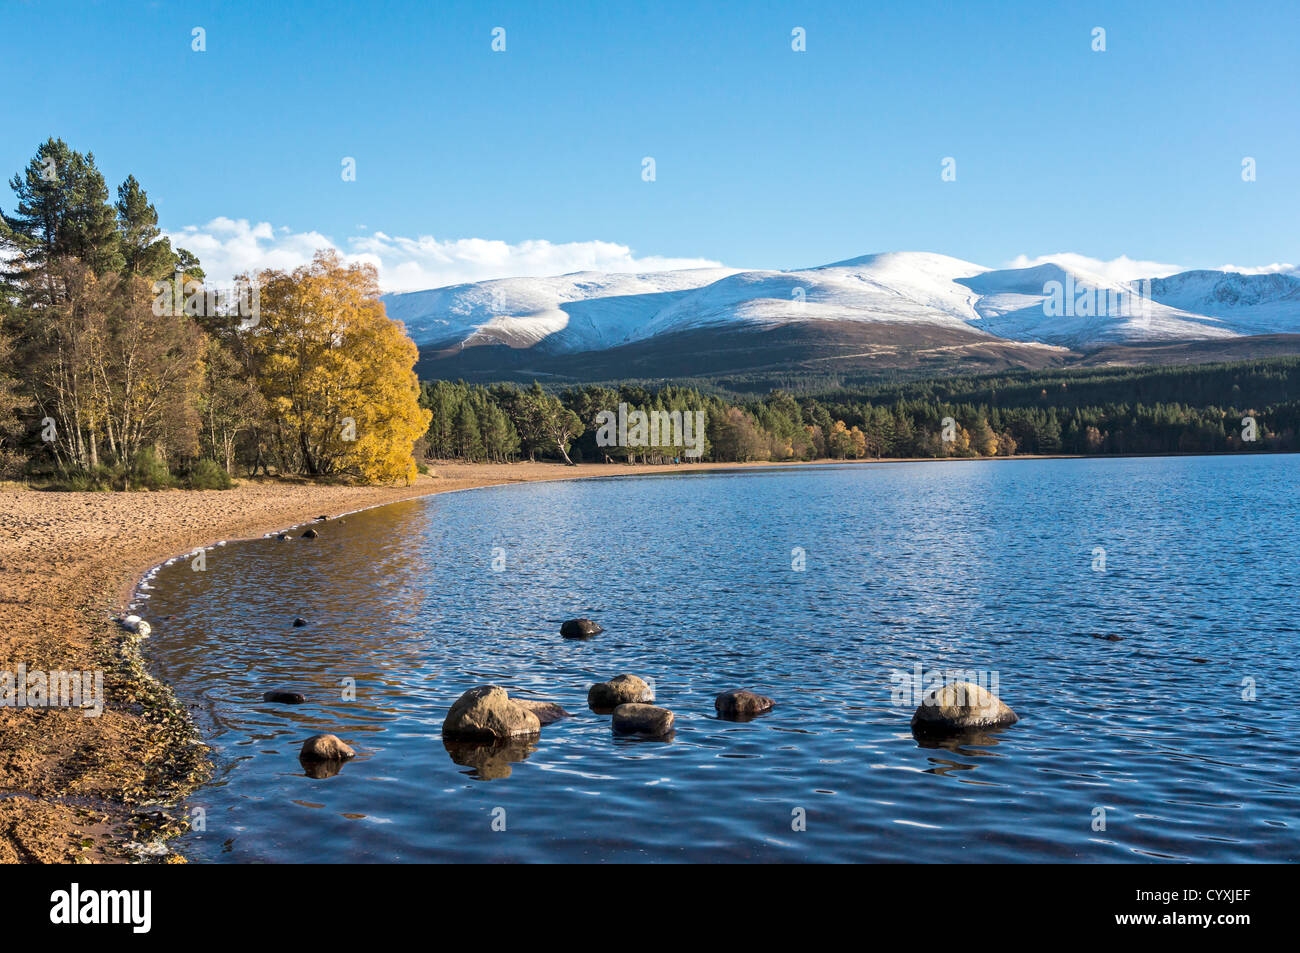 Loch Morlich in the Cairngorms region of Scotland on a calm and sunny autumn day with snow covered Cairn Gorm  mountain Stock Photo